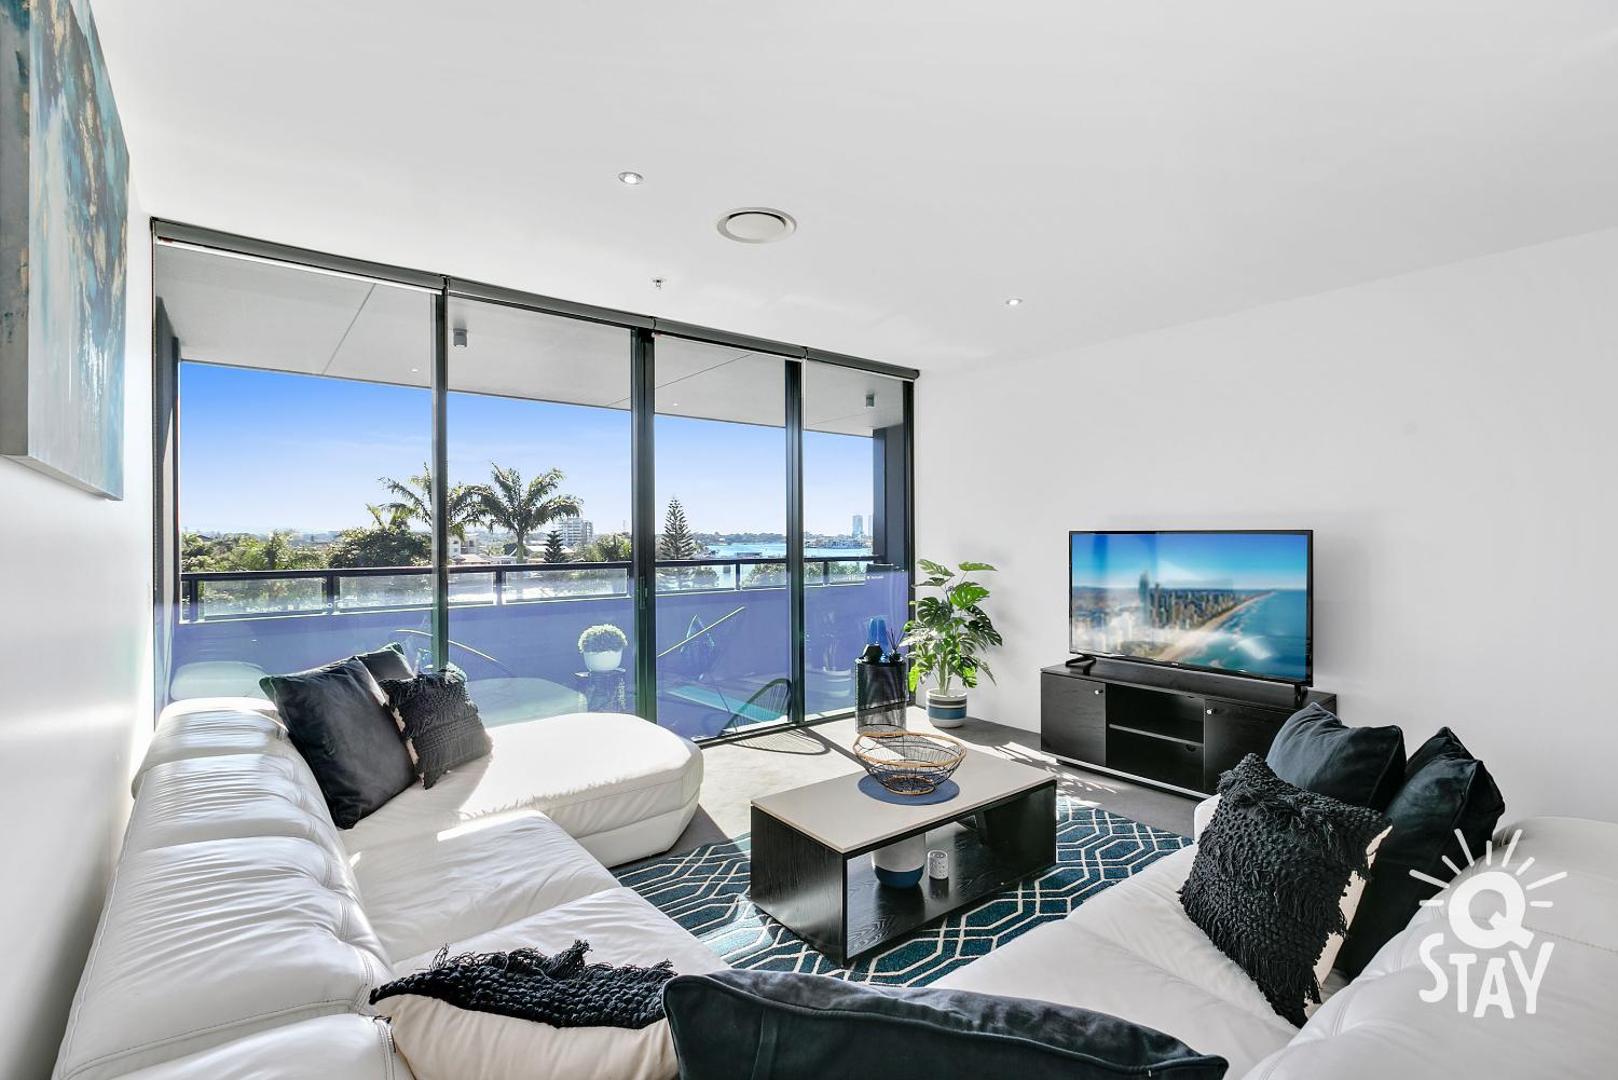 3 Bedroom Apartment in the heart of Surfers- Sleeps 9 – Circle on Cavill AMAZING!!